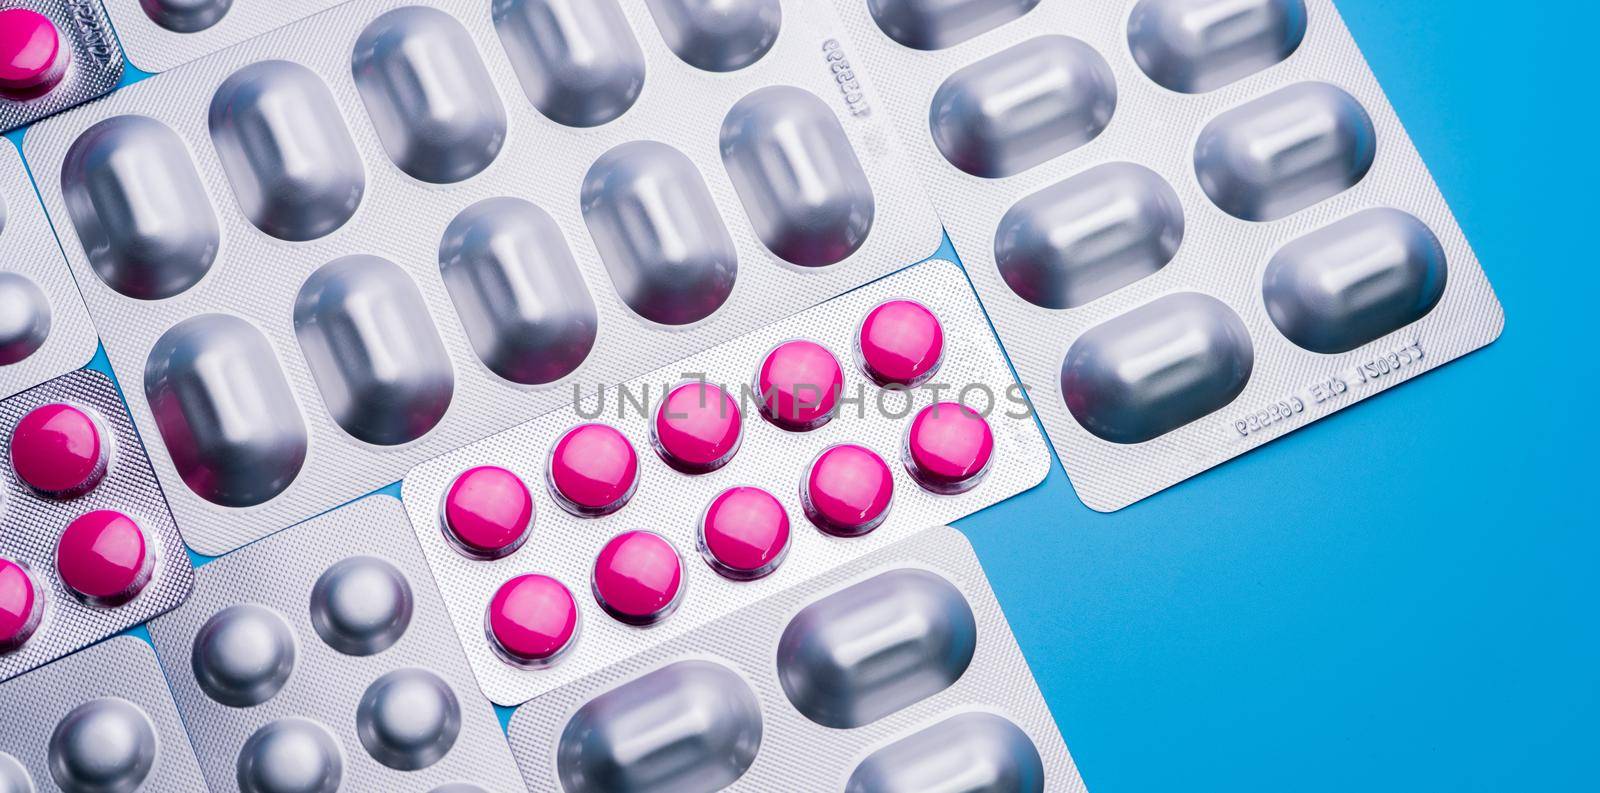 Pink tablets in blister pack and silver aluminium foil pack for capsule and tablets pills in pharmaceutical industry. Pharmaceutical package manufacturing. Top view of round tablets pills. Pharmacy.